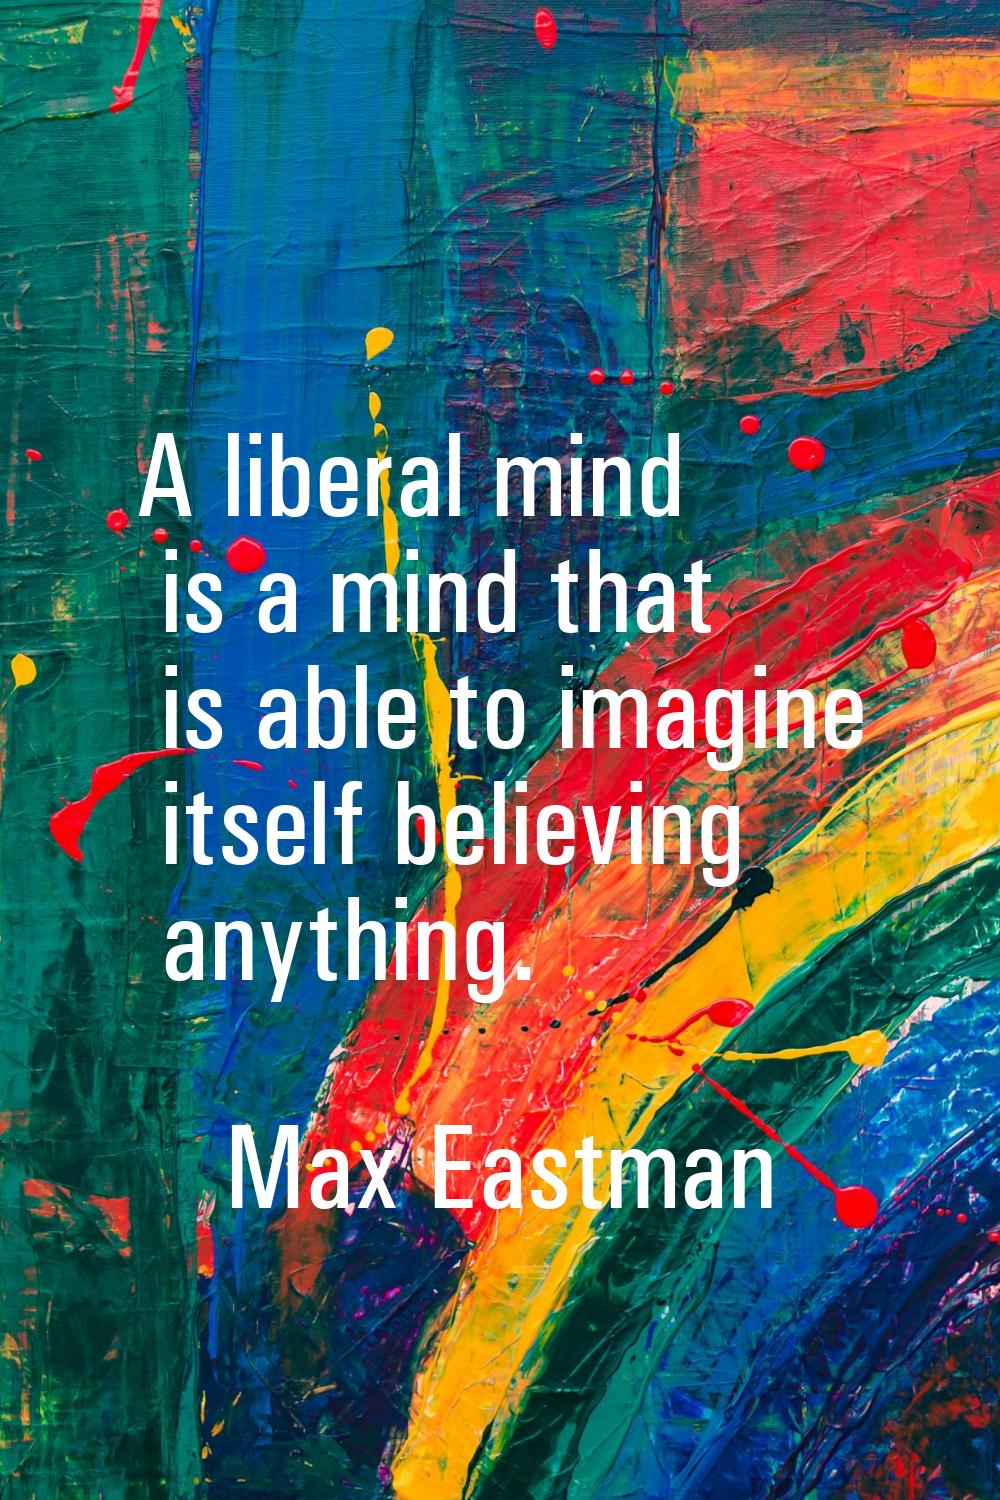 A liberal mind is a mind that is able to imagine itself believing anything.